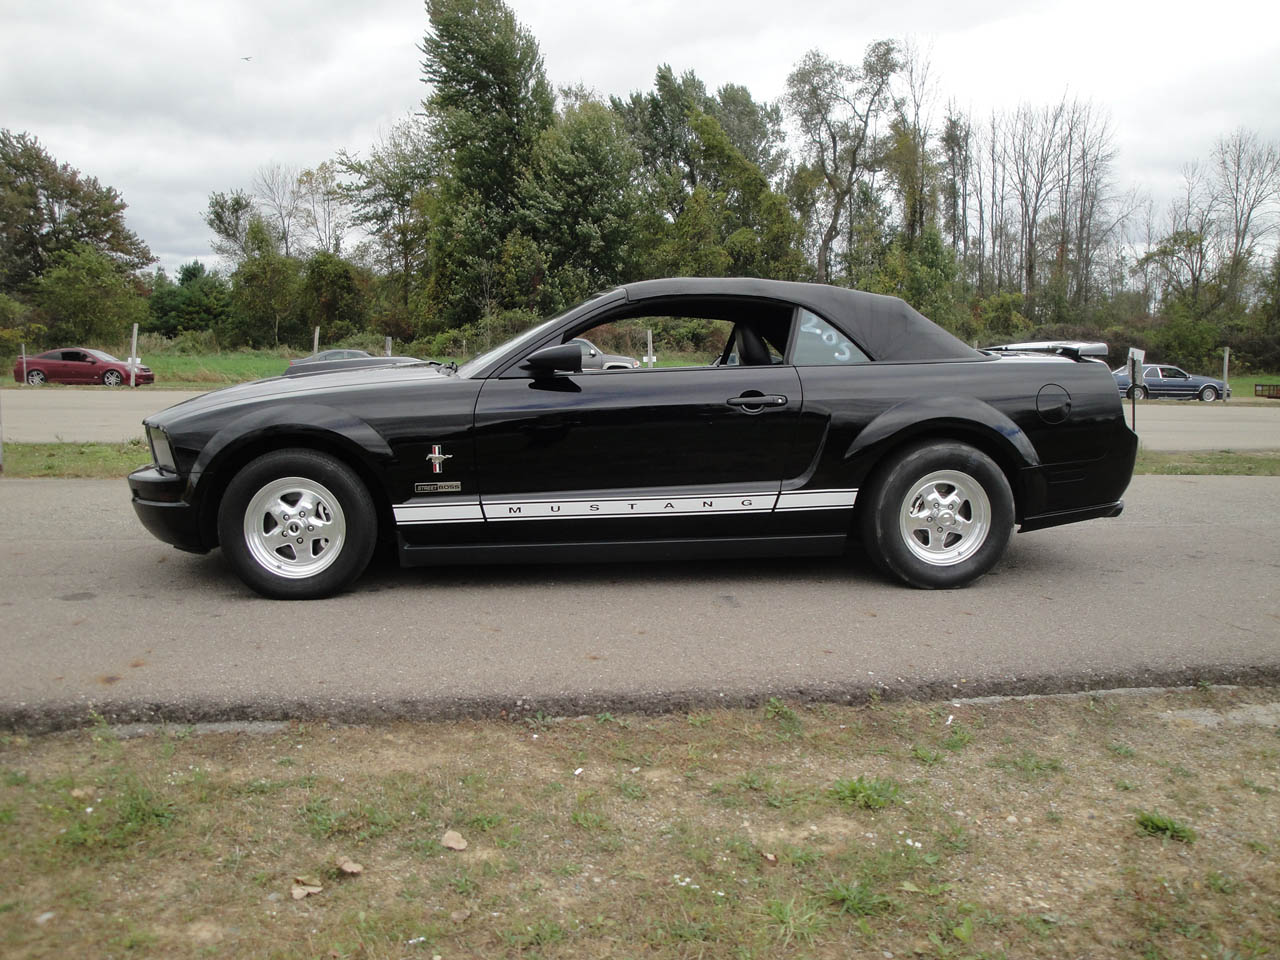 2006 Ford mustang 0-60 times #5